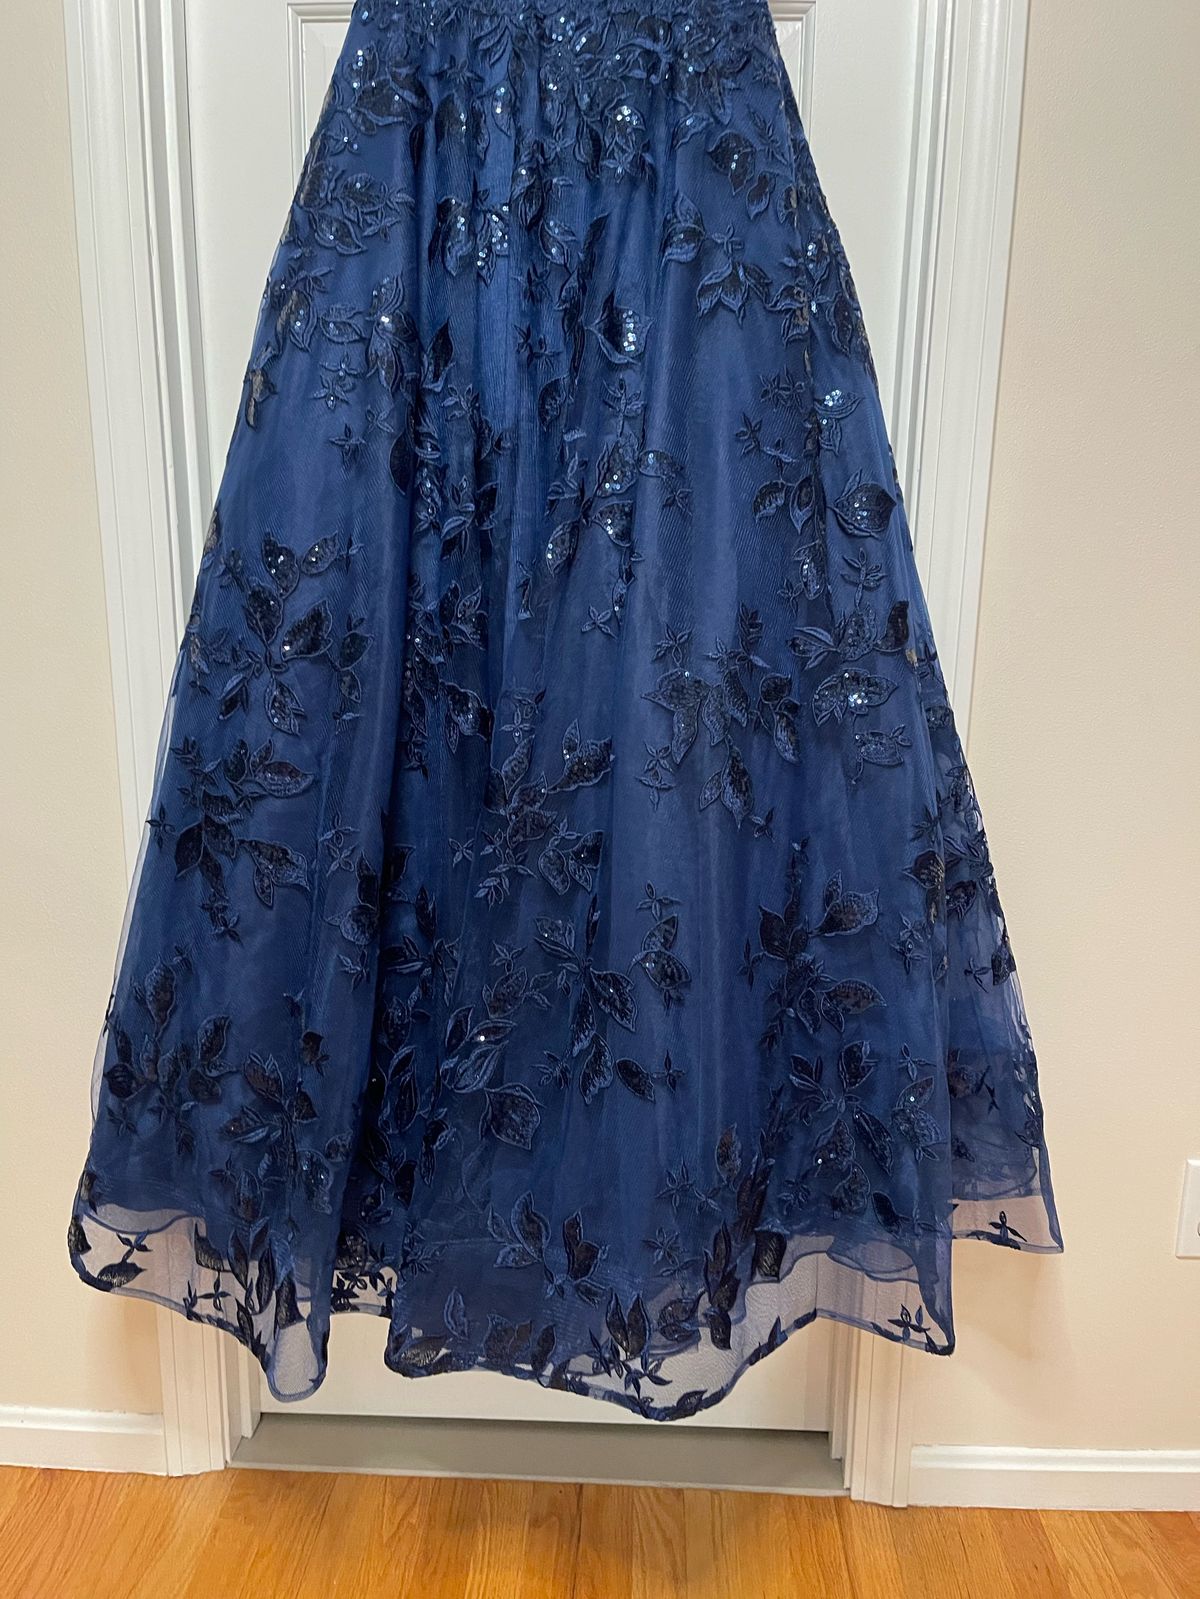 Ellie Wilde Size 10 Prom Blue Ball Gown on Queenly